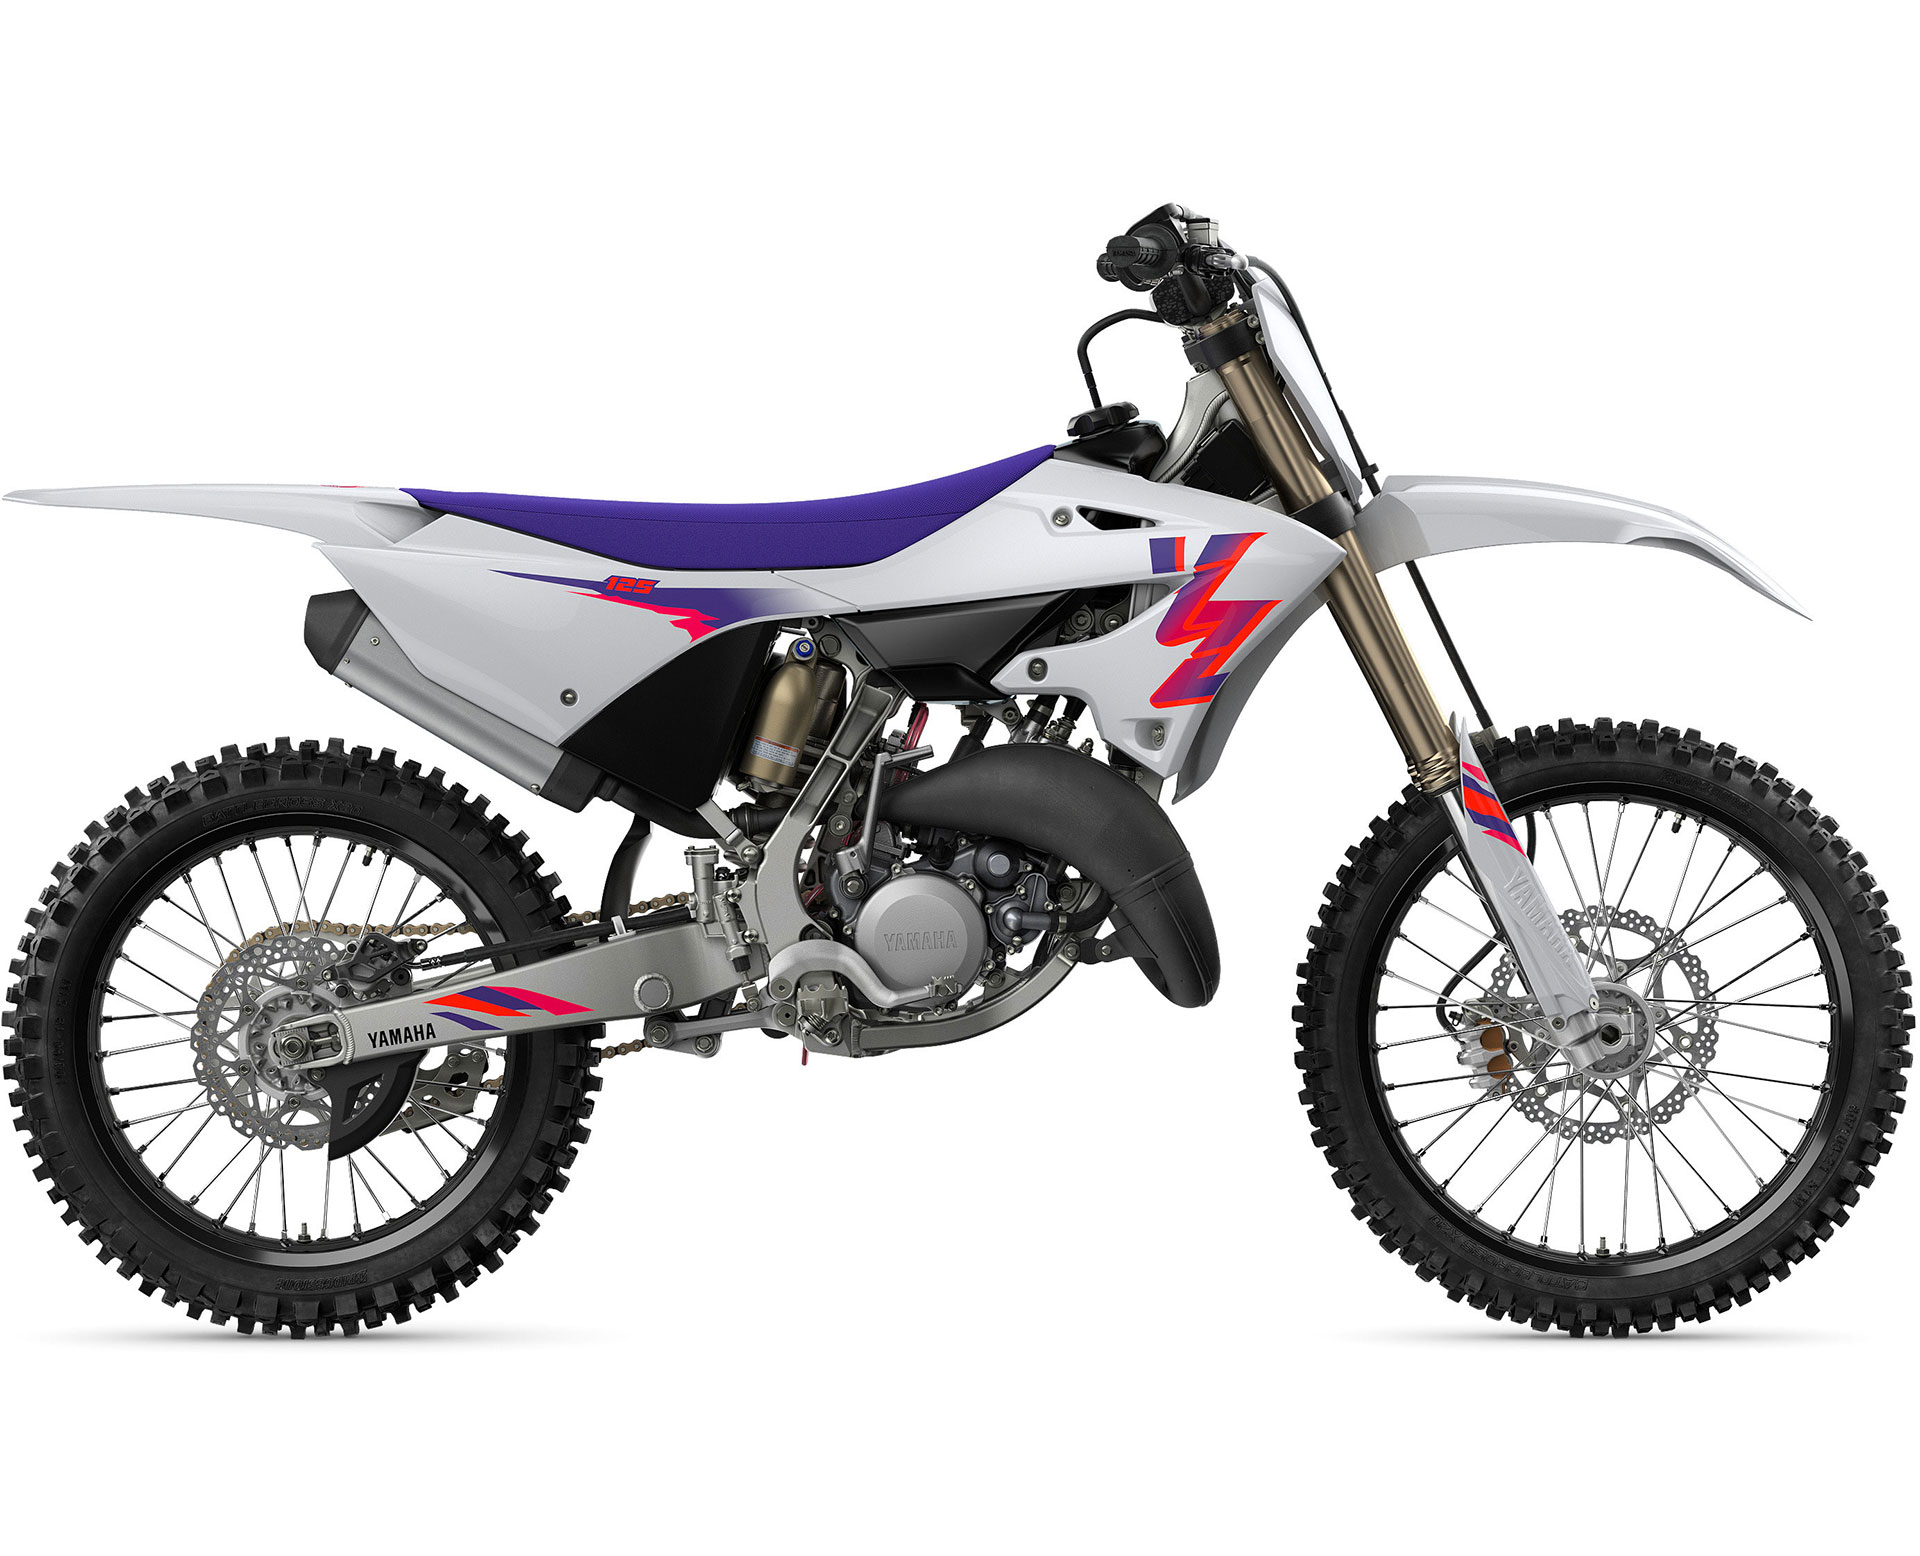 Thumbnail of your customized 2024 YZ125